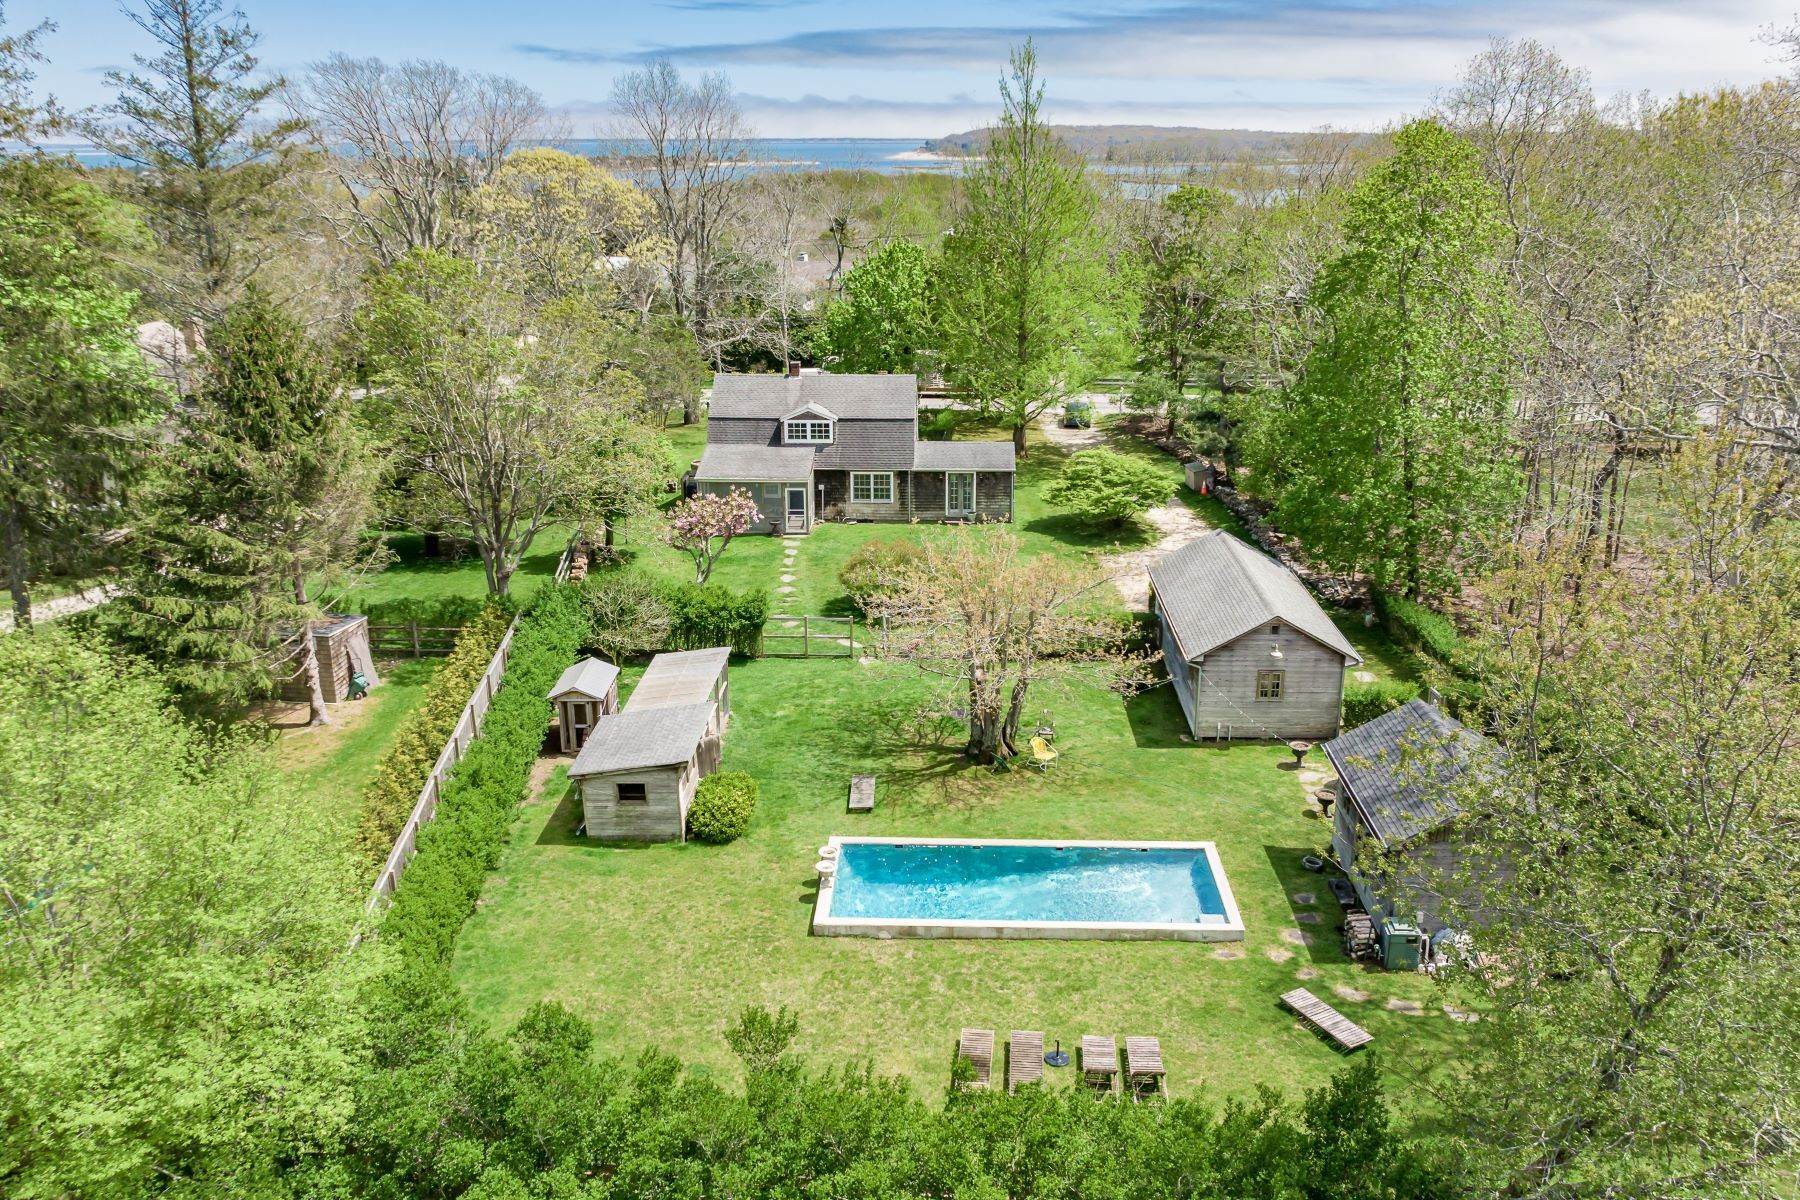 Single Family Homes for Sale at Timeless Springs Farmhouse Compound 943 Springs Fireplace Road East Hampton, New York 11937 United States